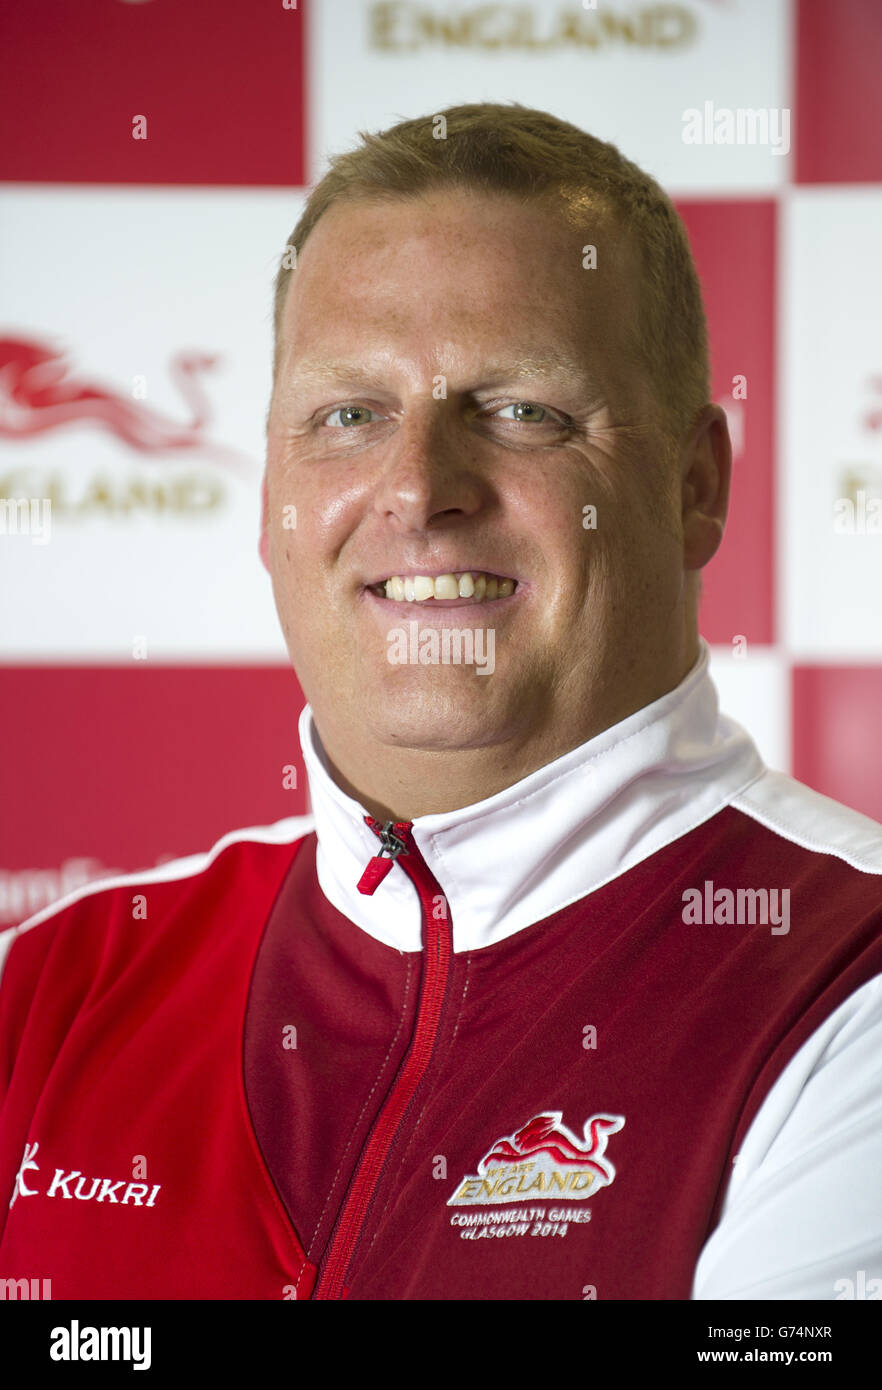 Team England swimming coach Jon Rudd during a kitting out session at St George's Park, Burton ahead of the 2014 Commonwealth Games Stock Photo